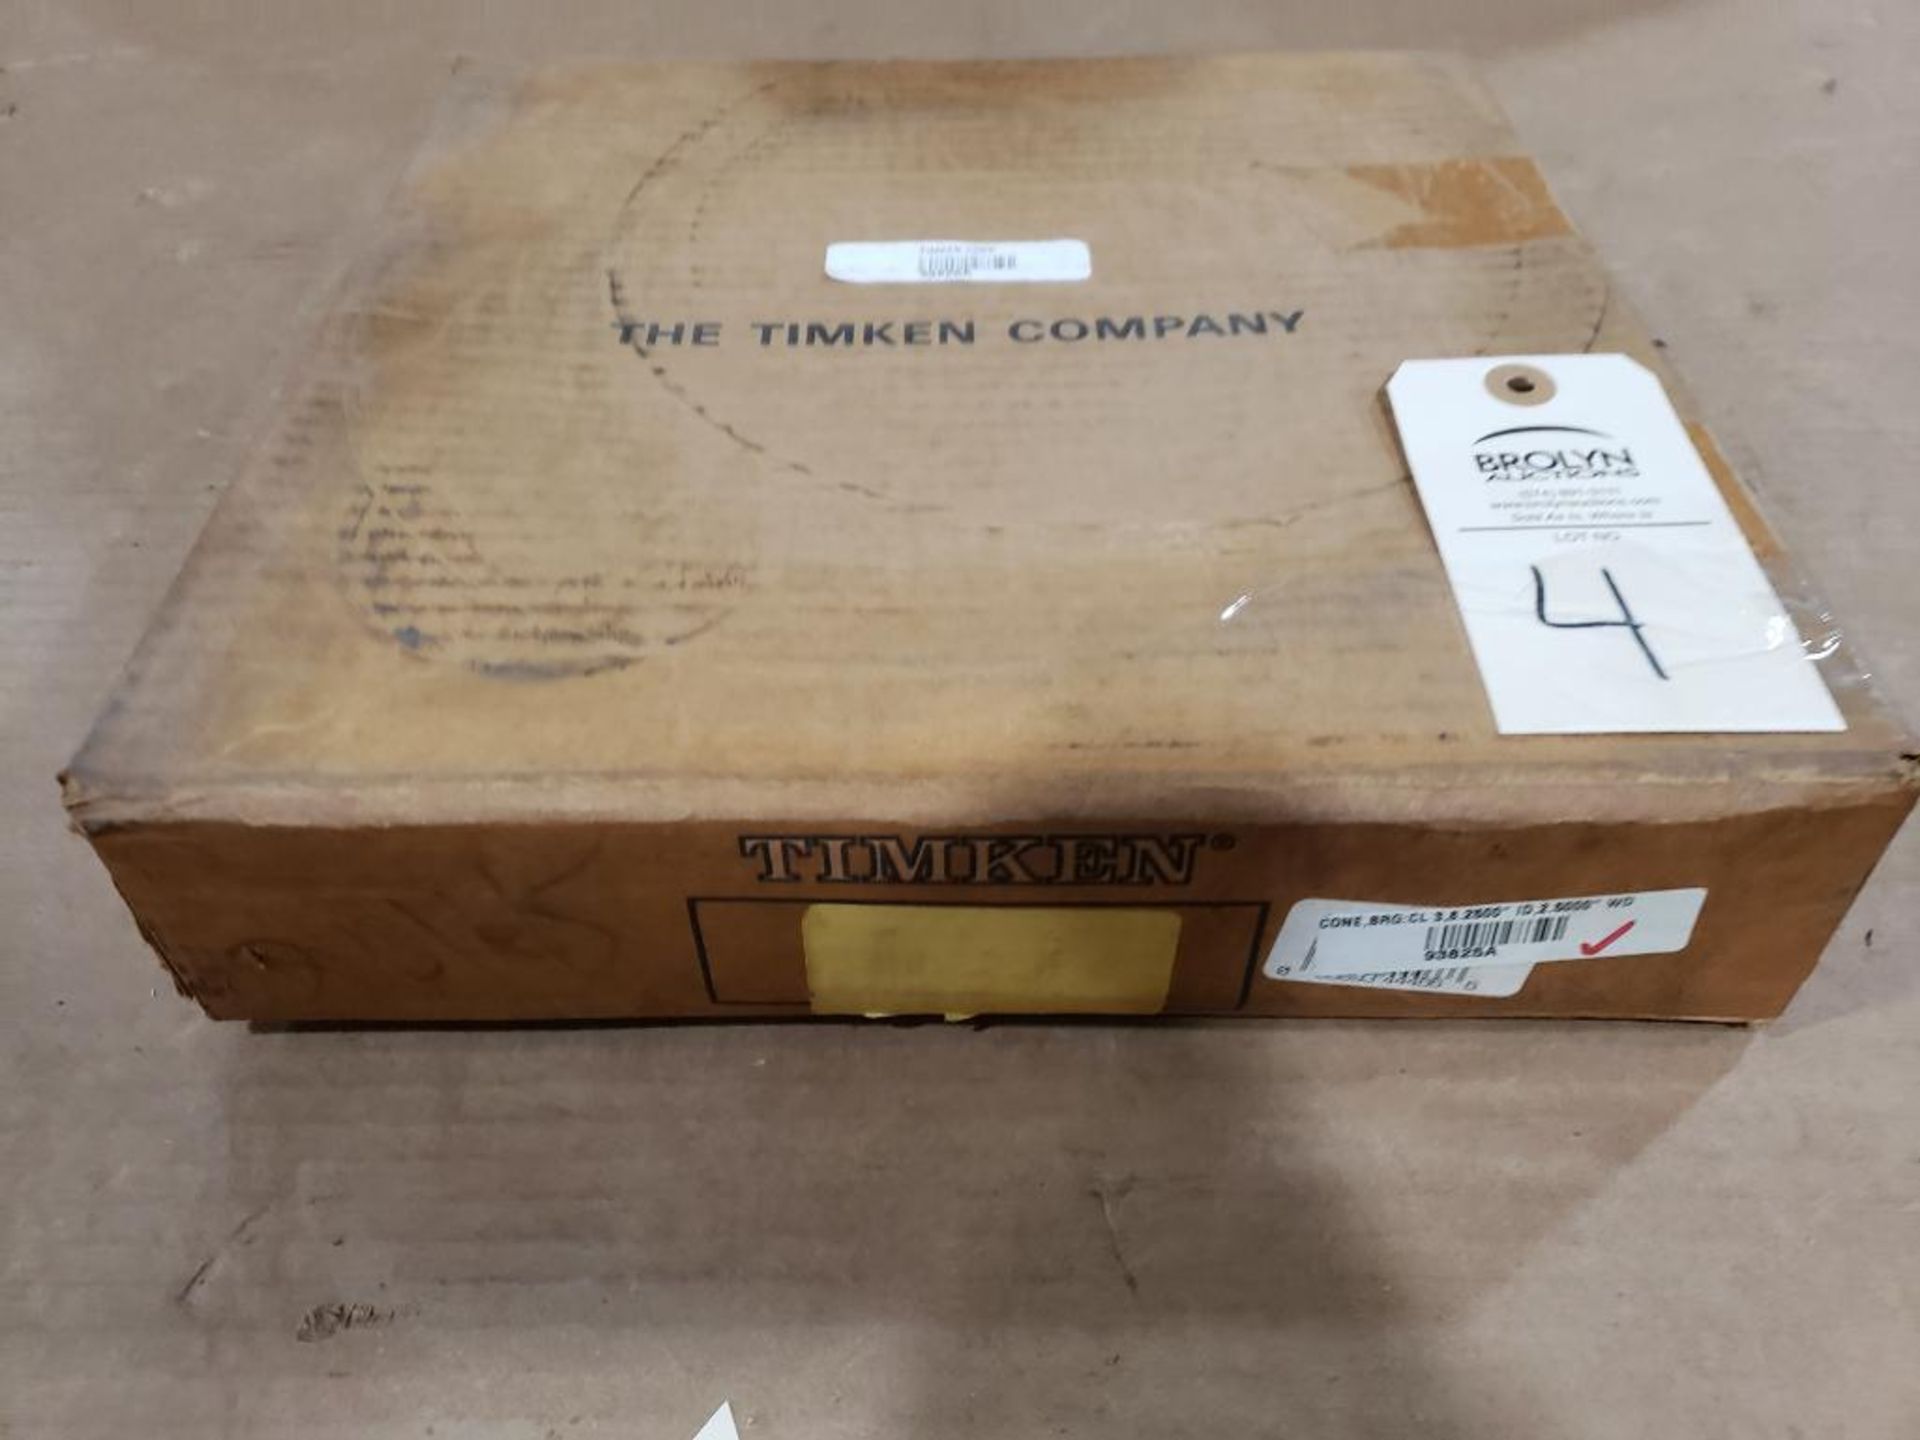 Timken bearing. Part number 93825A. - Image 2 of 4